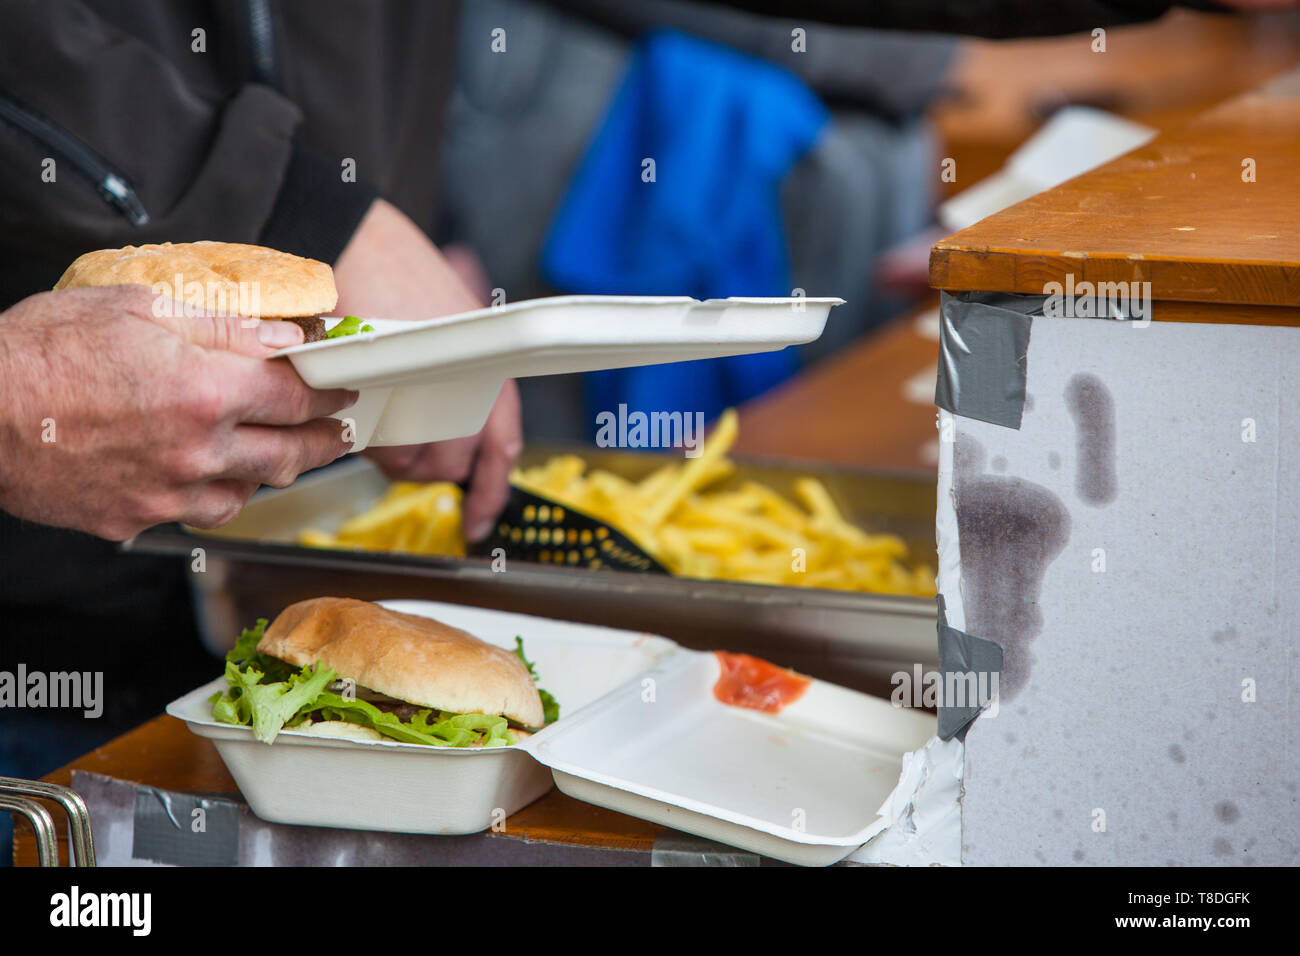 Preparing take away meal with freshly cooked burger and french fries on outdoors kitchen at street music festival in Gland, Vaud, Switzerland Stock Photo